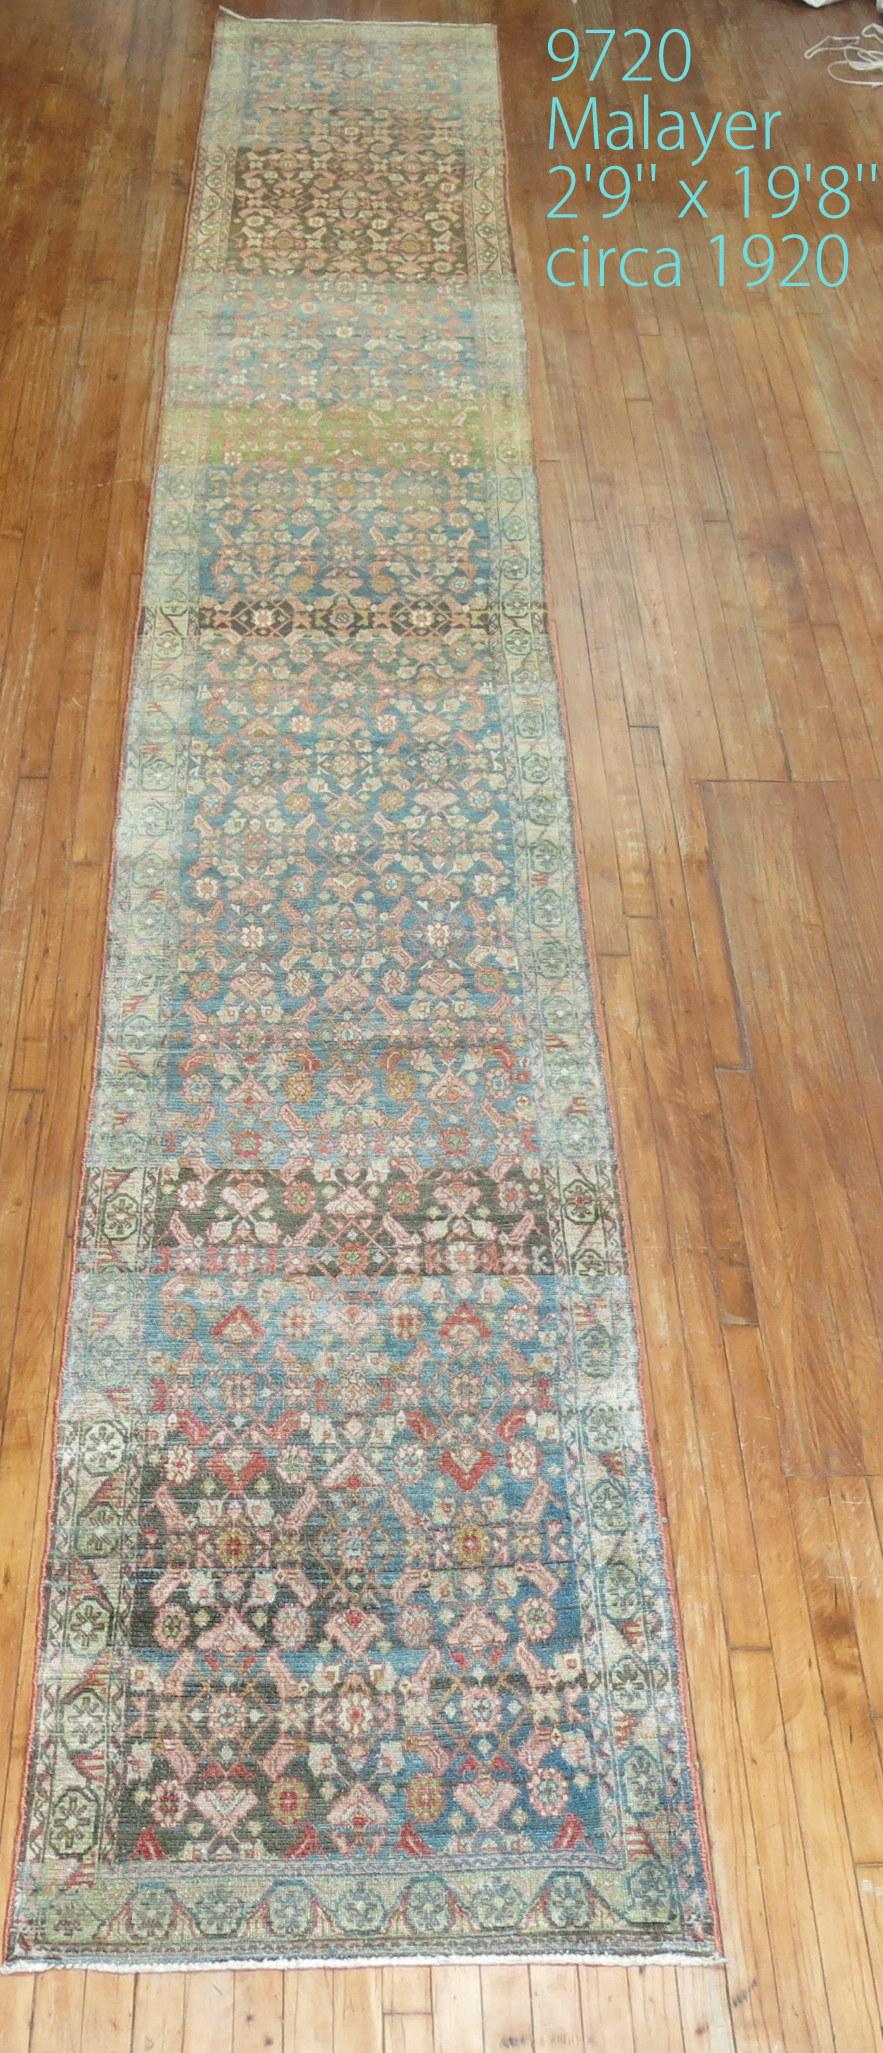 A long and narrow Persian Malayer runner from the early 20th century. 

Measures: 2'9